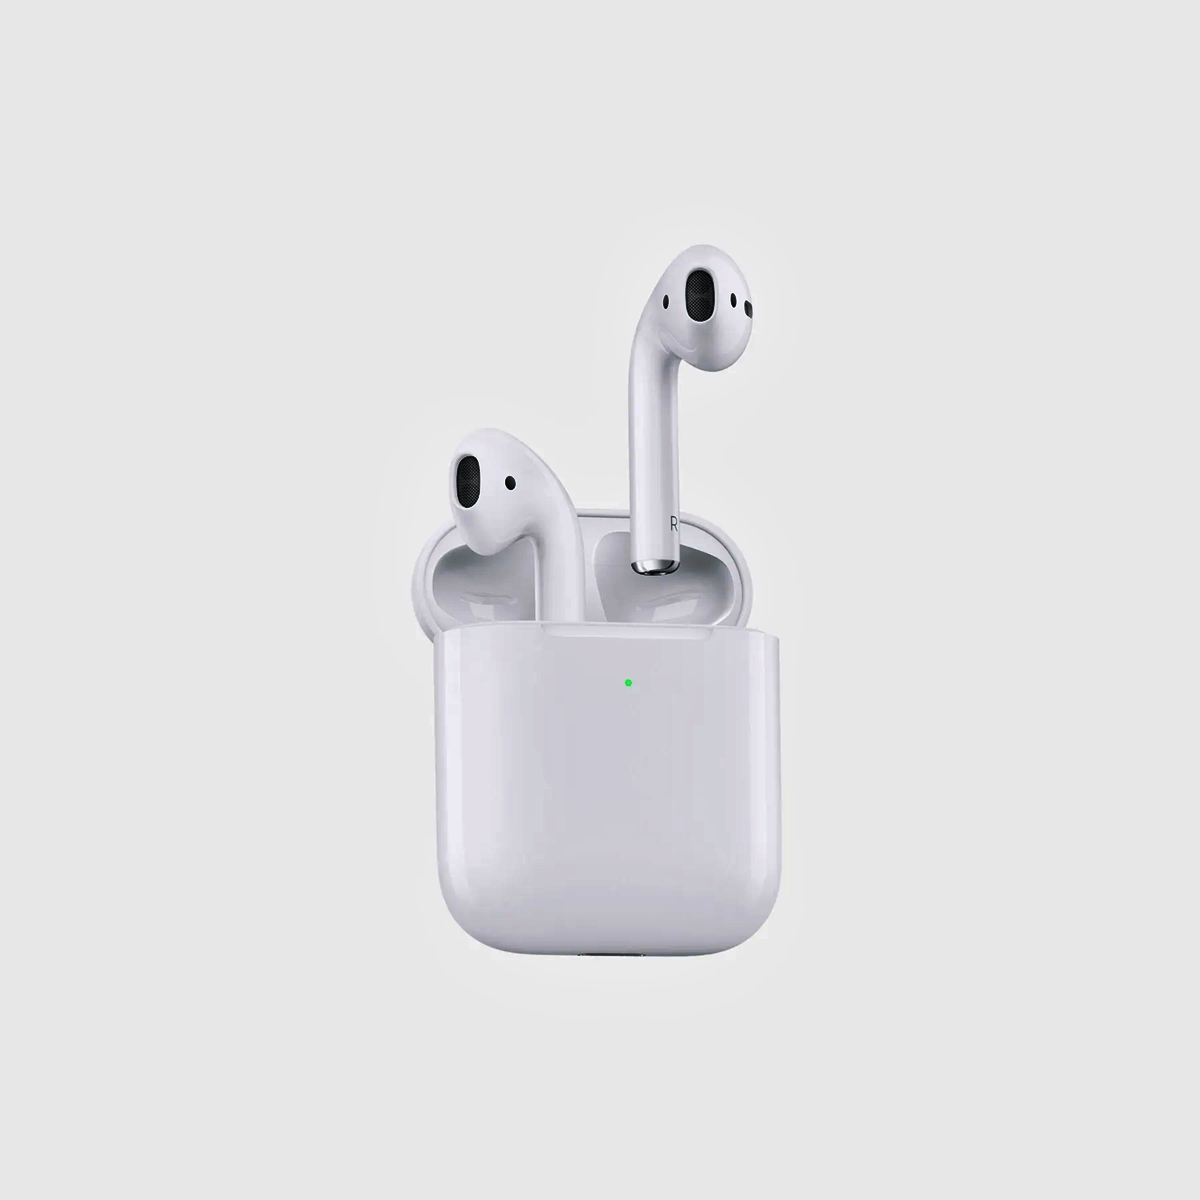 announced-apple-airpods-2019-release-date-plus-studiopods-airpower-rumors